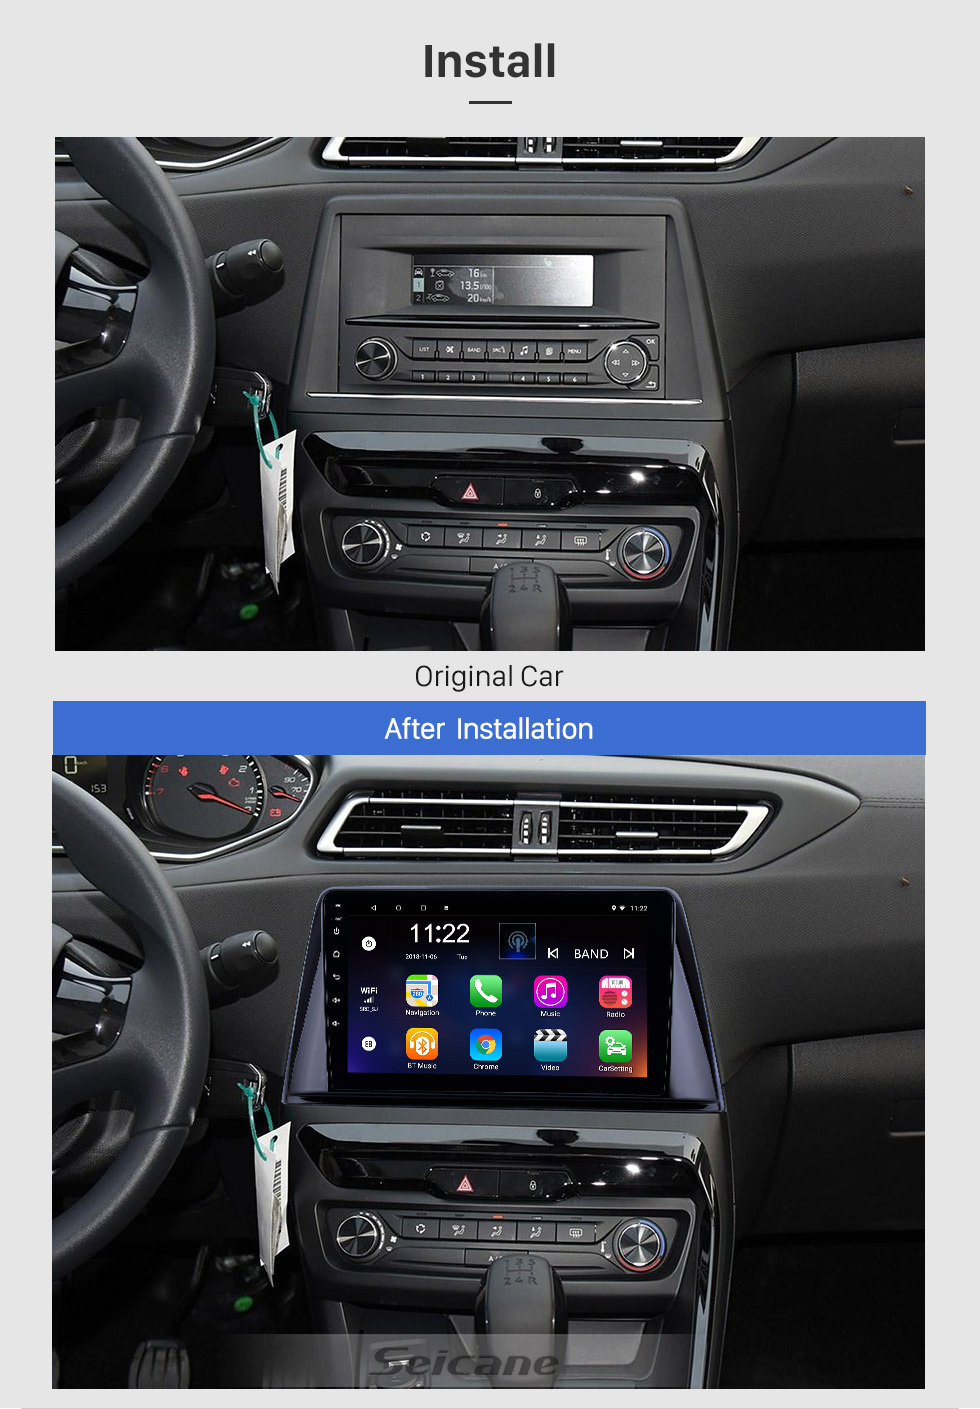 Seicane HD Touchscreen 9 inch Android 10.0 GPS Navigation Radio for 2016-2018 Peugeot 308 with Bluetooth AUX support Carplay Steering Wheel Control